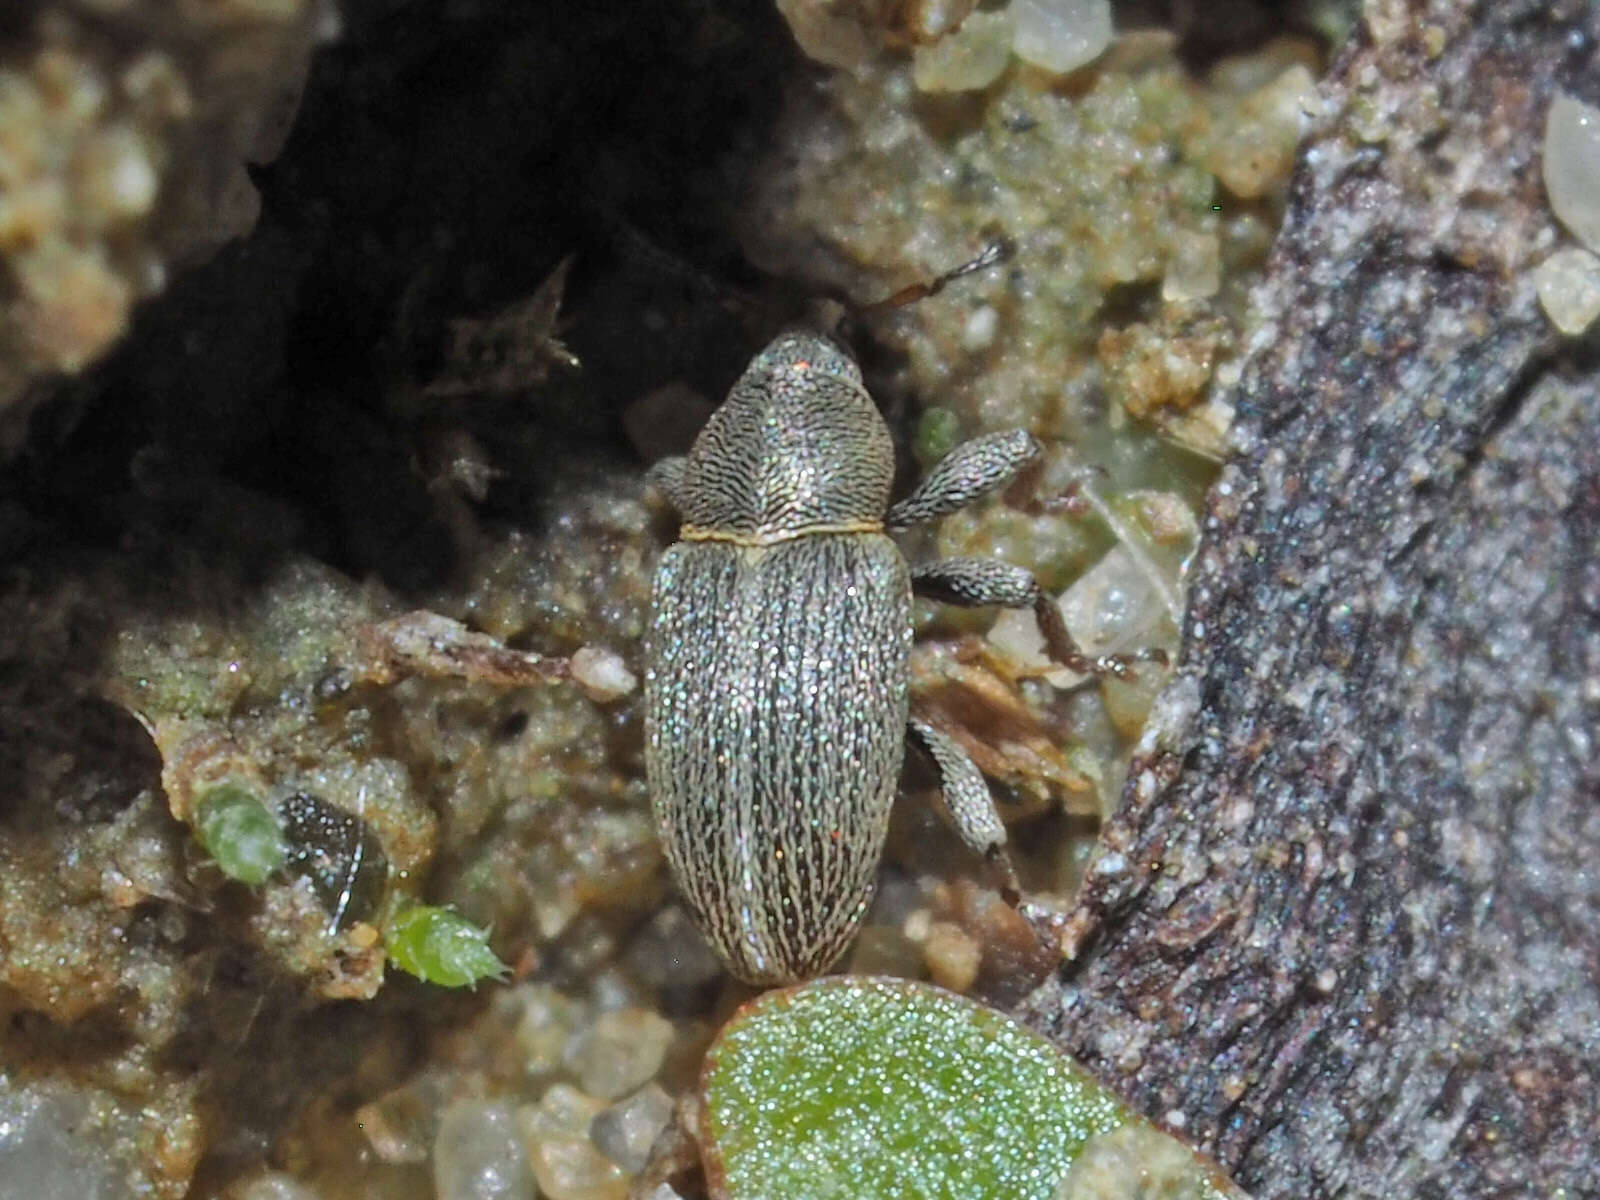 Image of Clover Seed Weevil